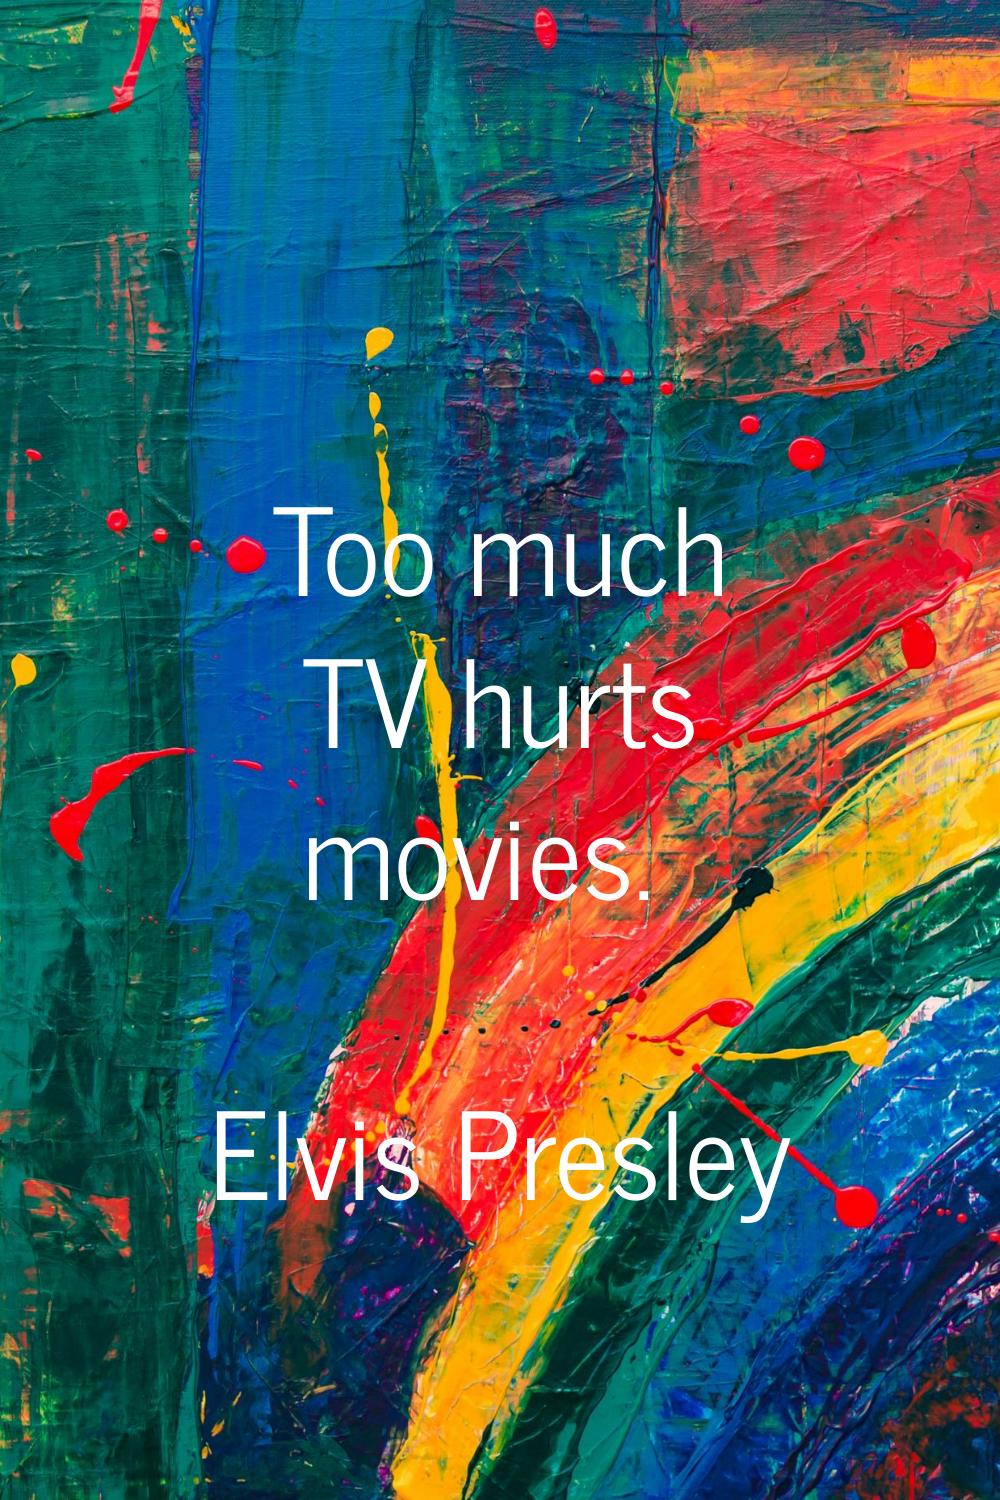 Too much TV hurts movies.